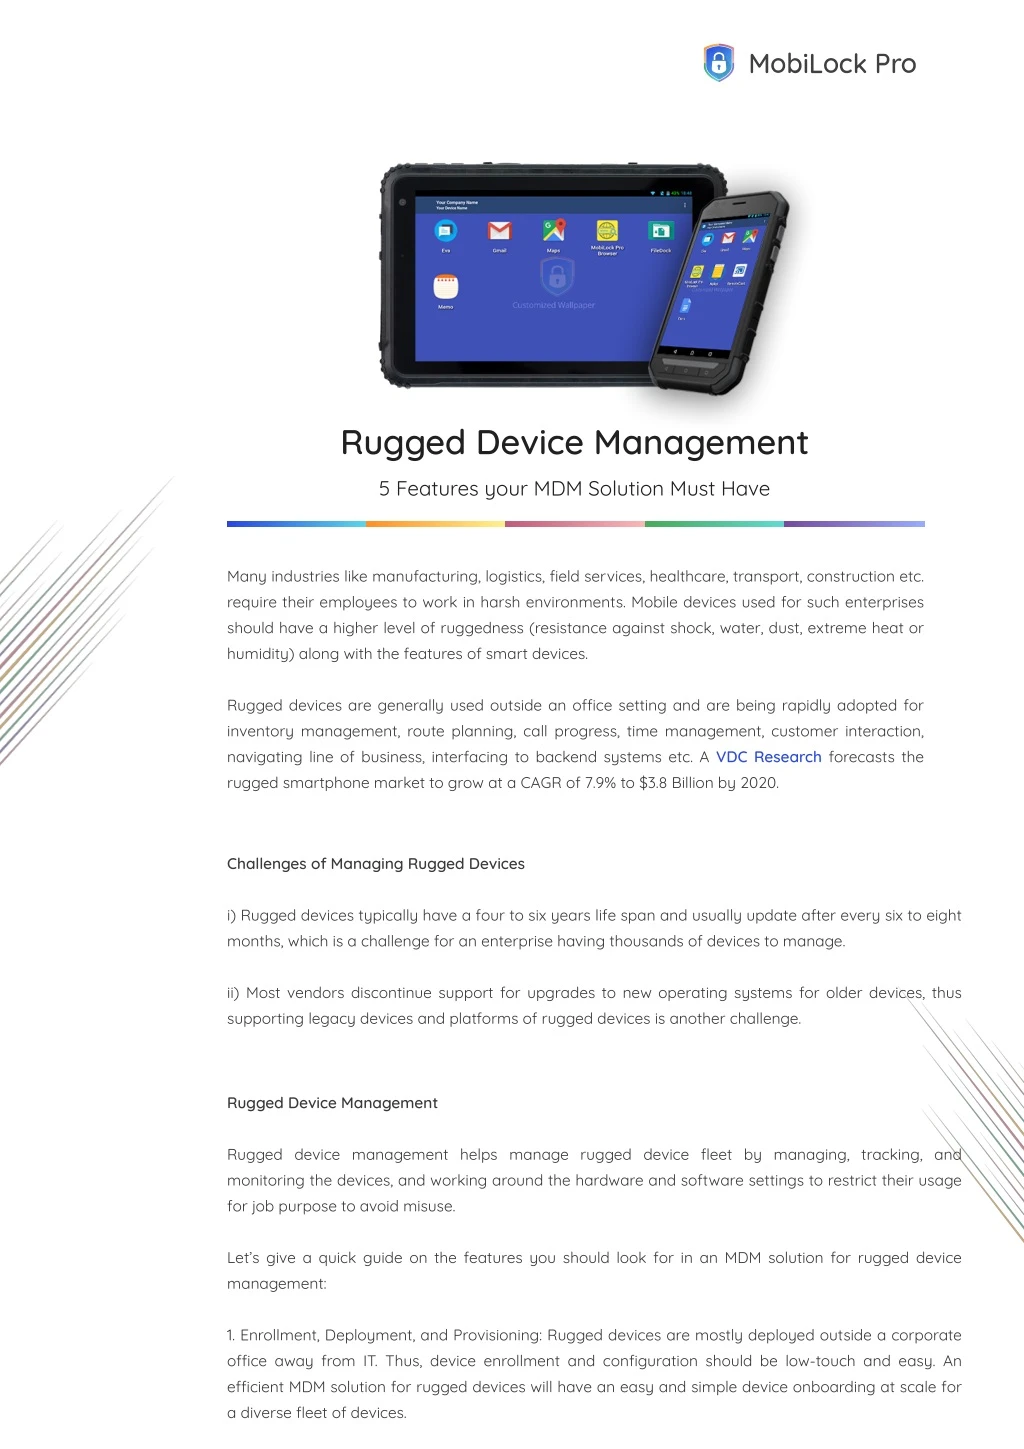 rugged device management